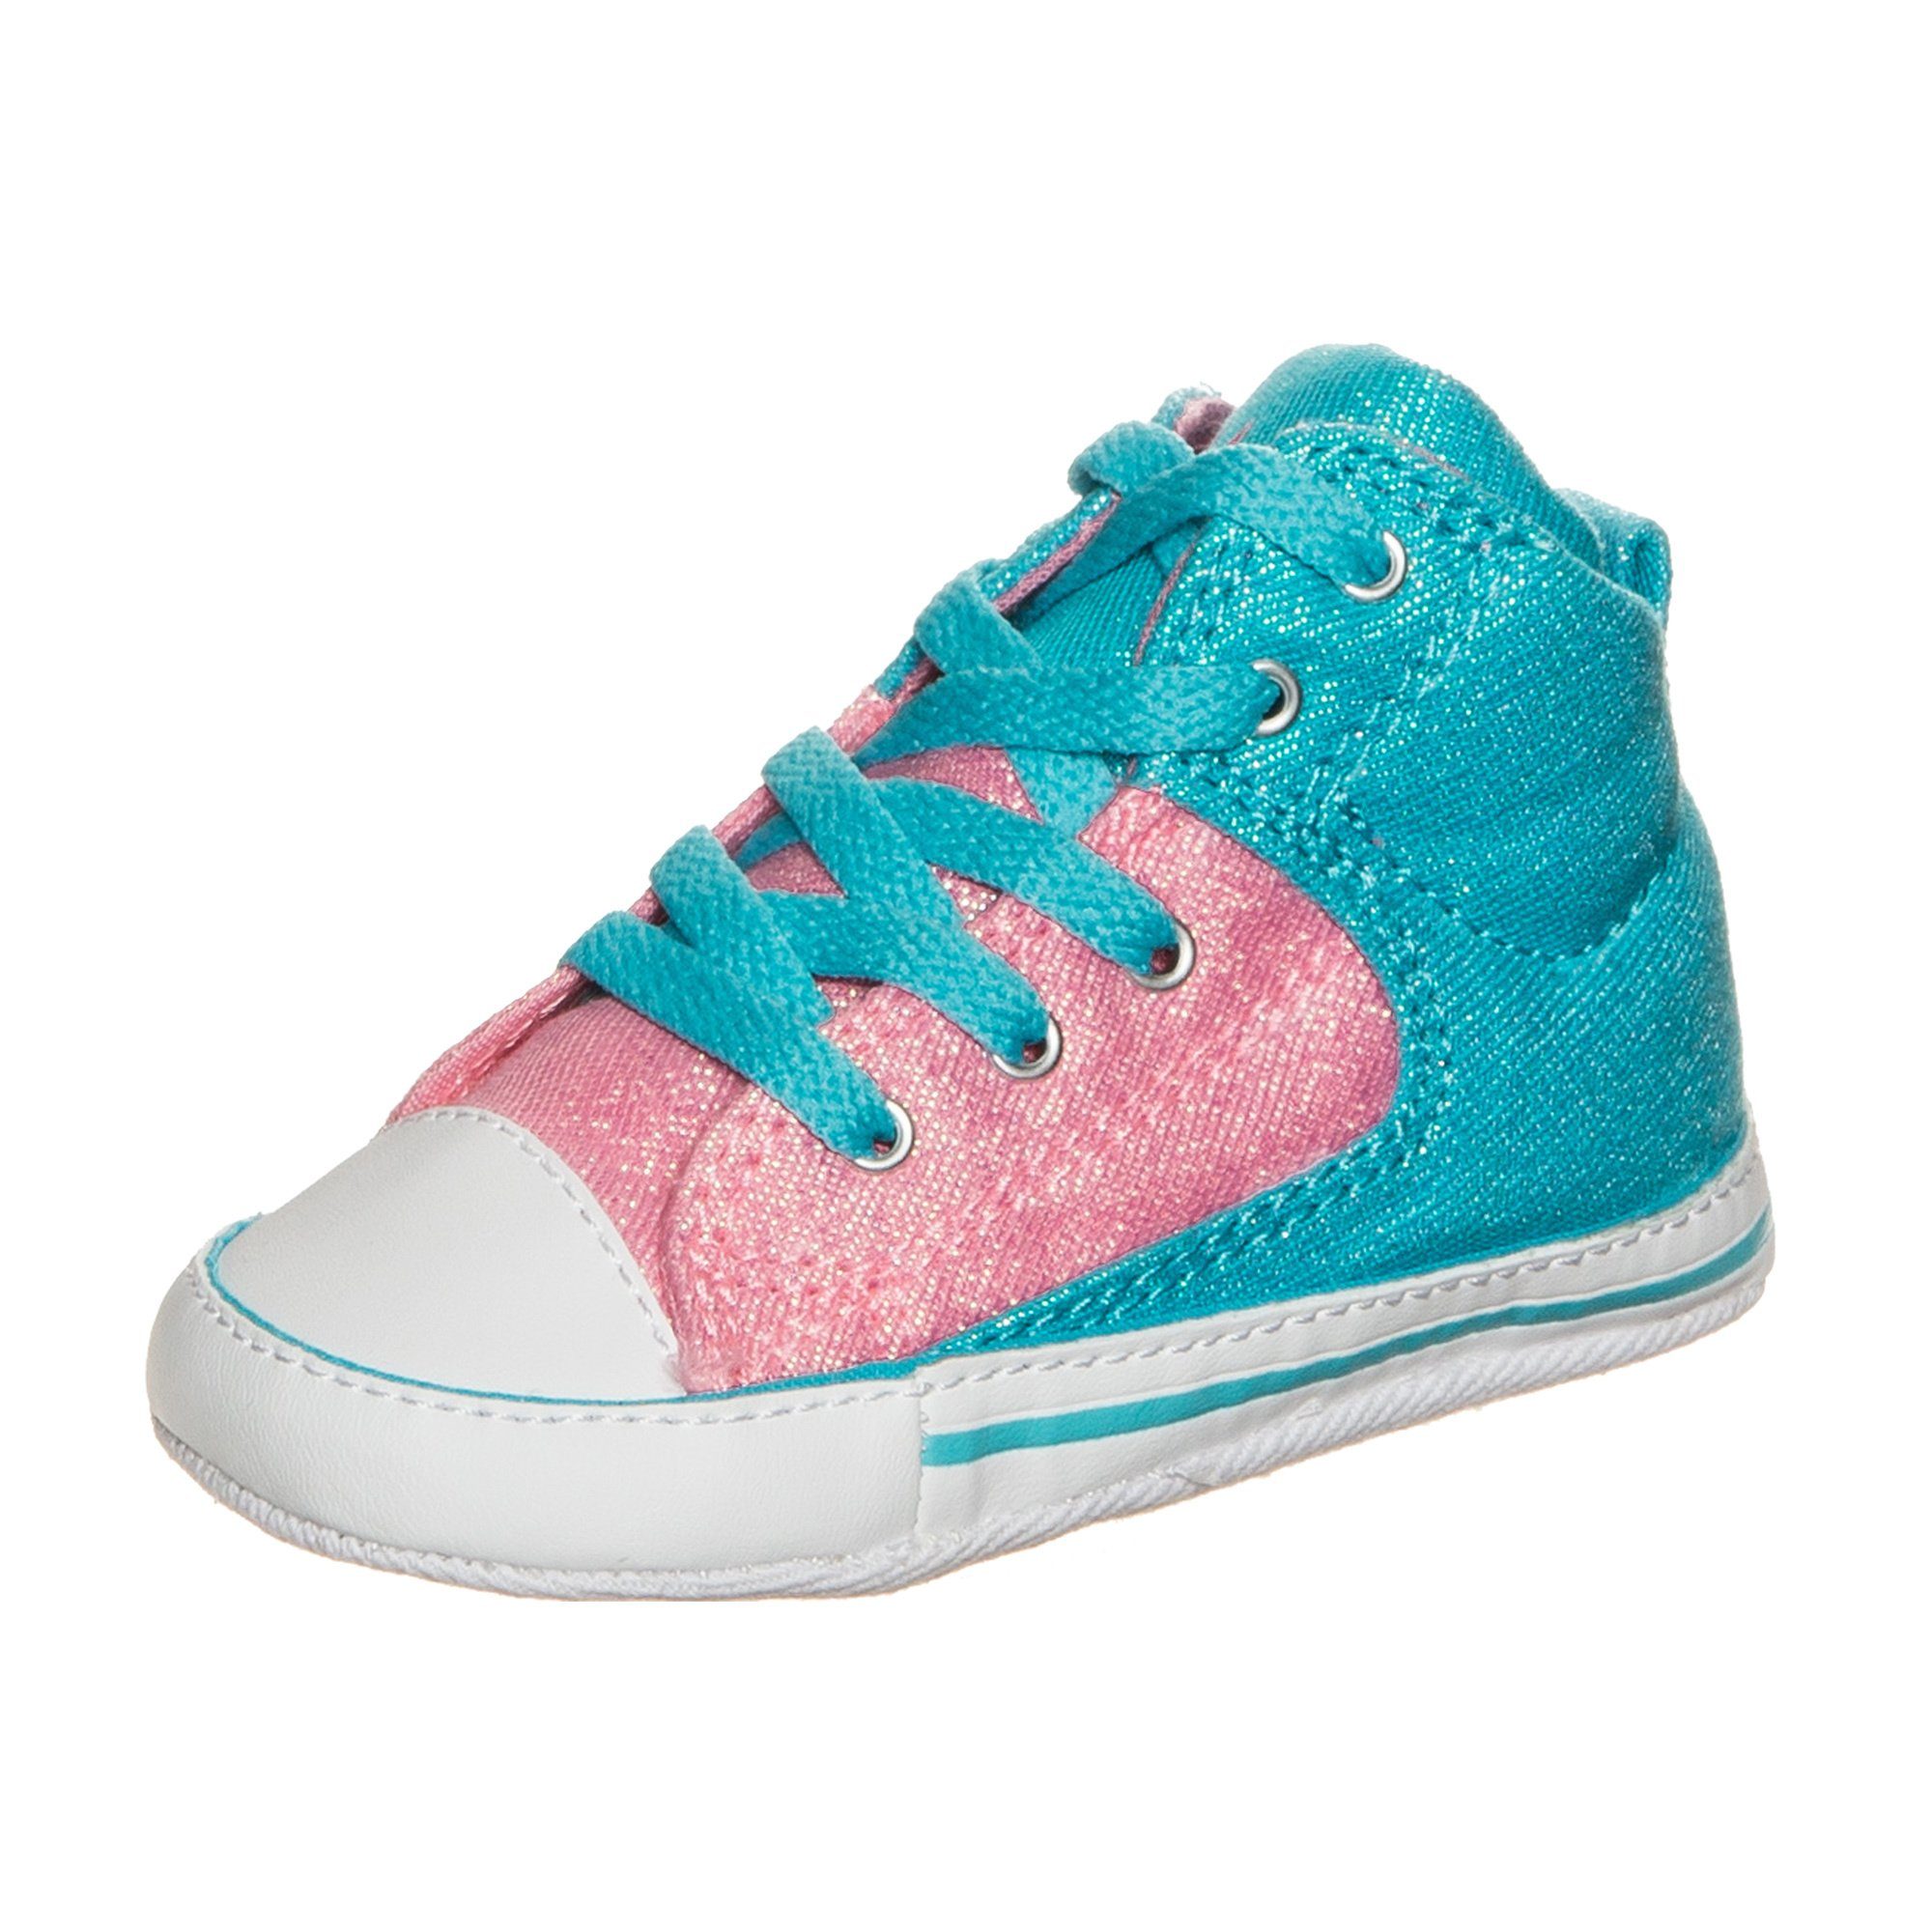 Converse NU 15% KORTING: Converse Chuck Taylor First Star High Street High sneakers voor baby's & peuters